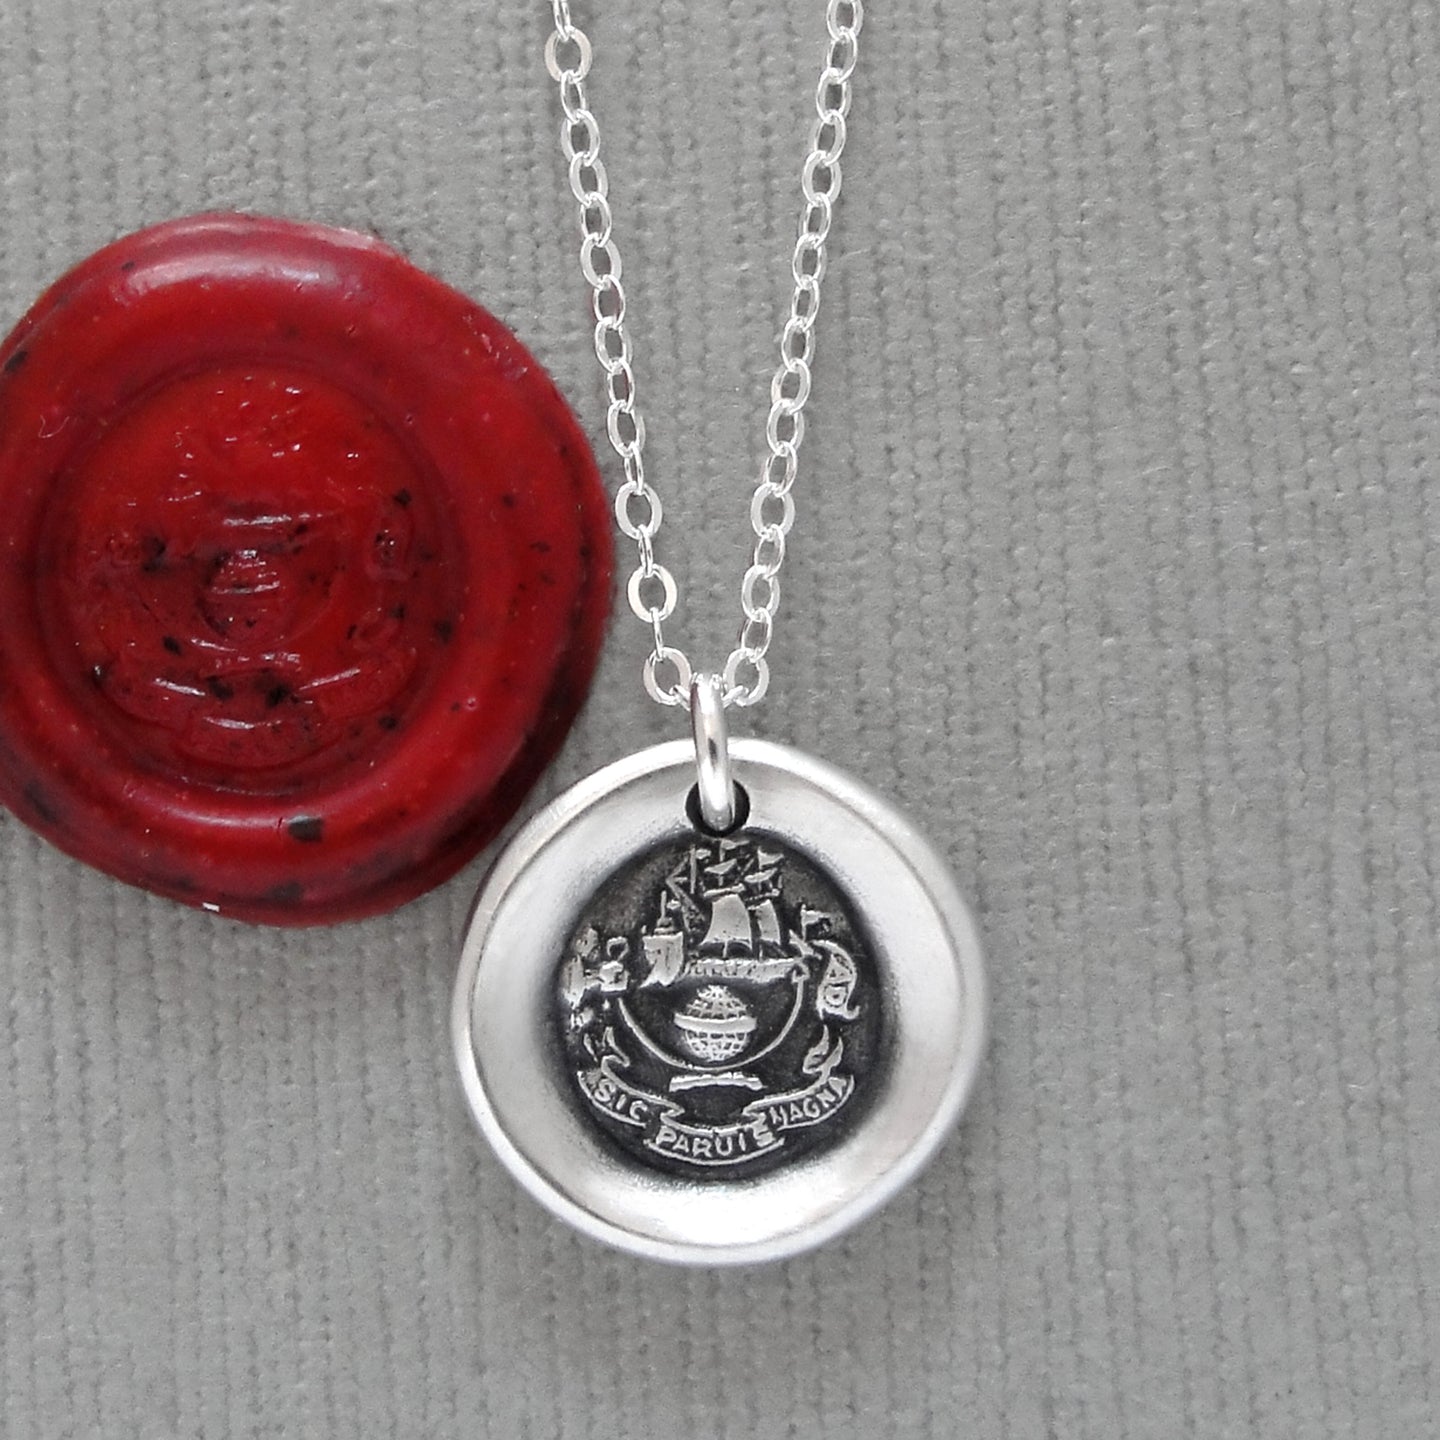 Great Things From Small - Wax Seal Necklace Sky's The Limit - Antique Silver Wax Seal Jewelry